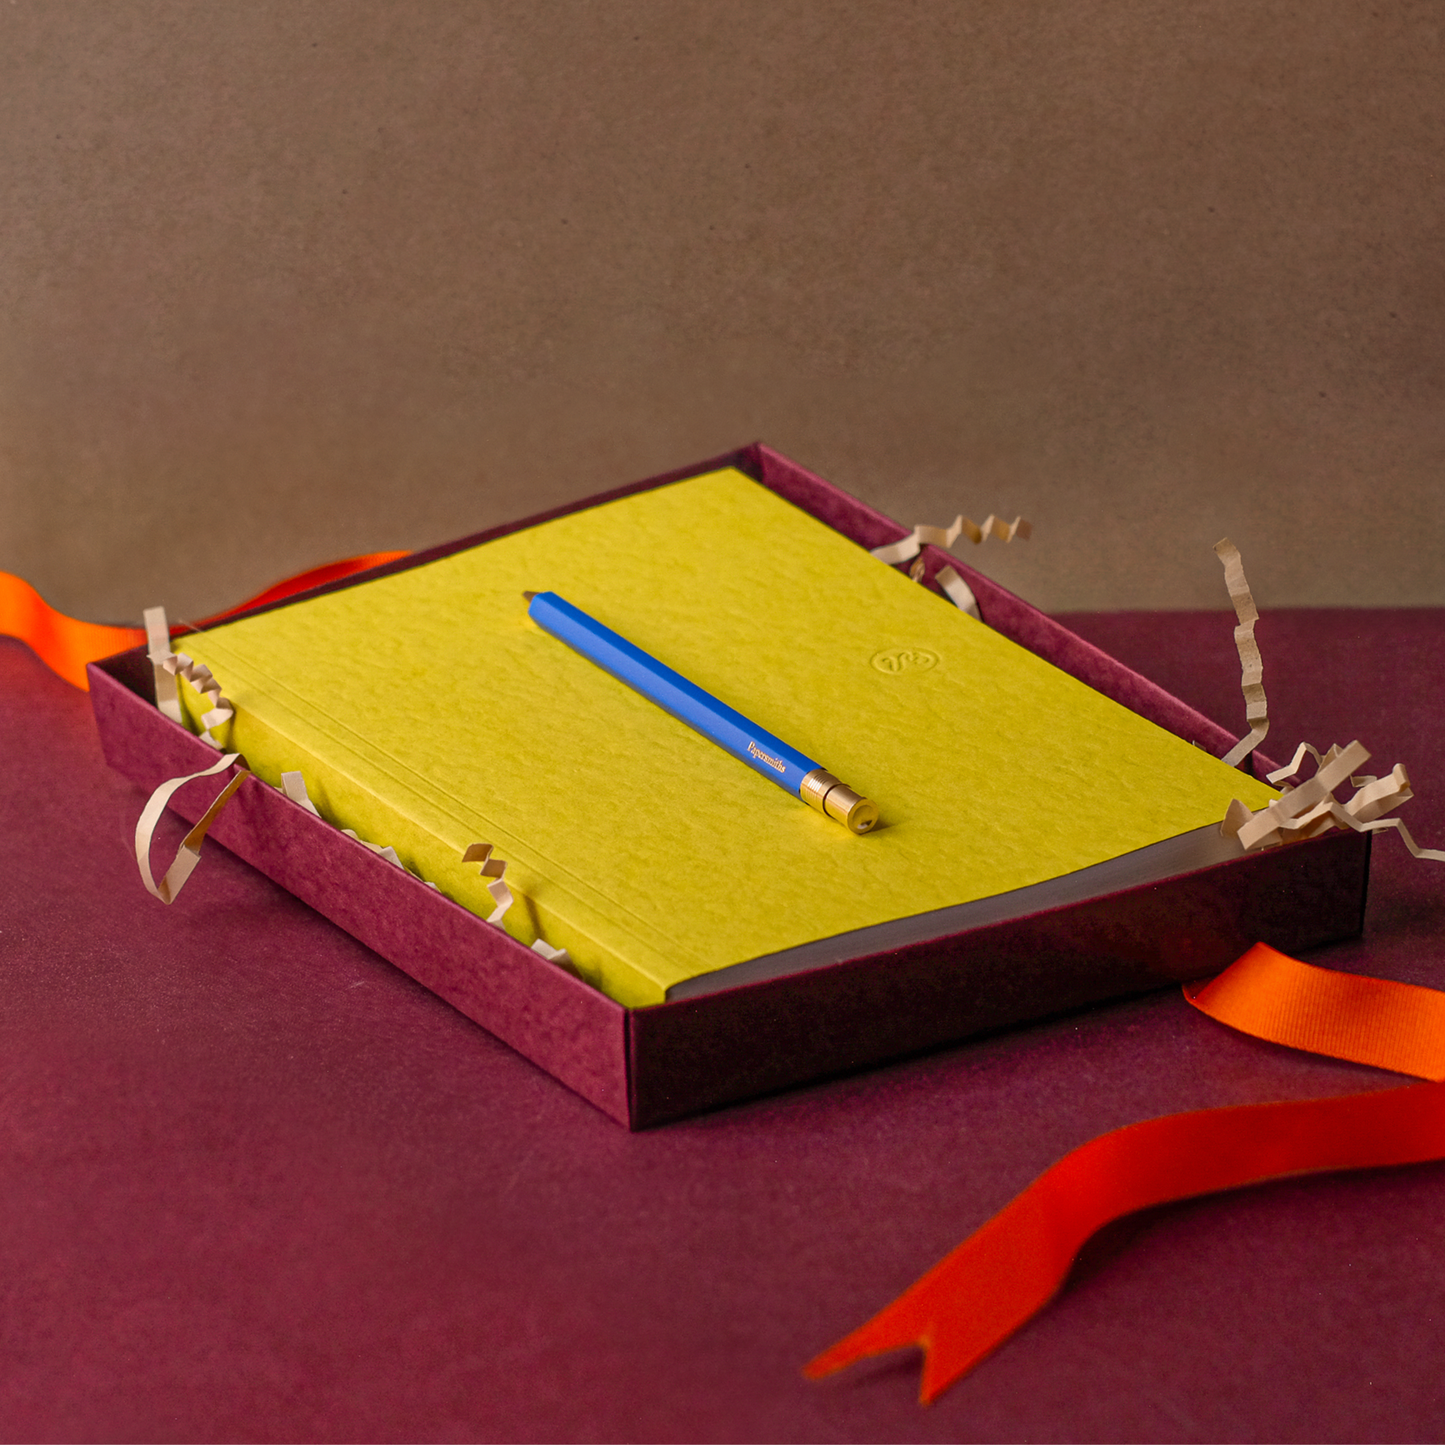 Limoncello Notebook and Pen Duo - Everyday Pen / Ruled Paper